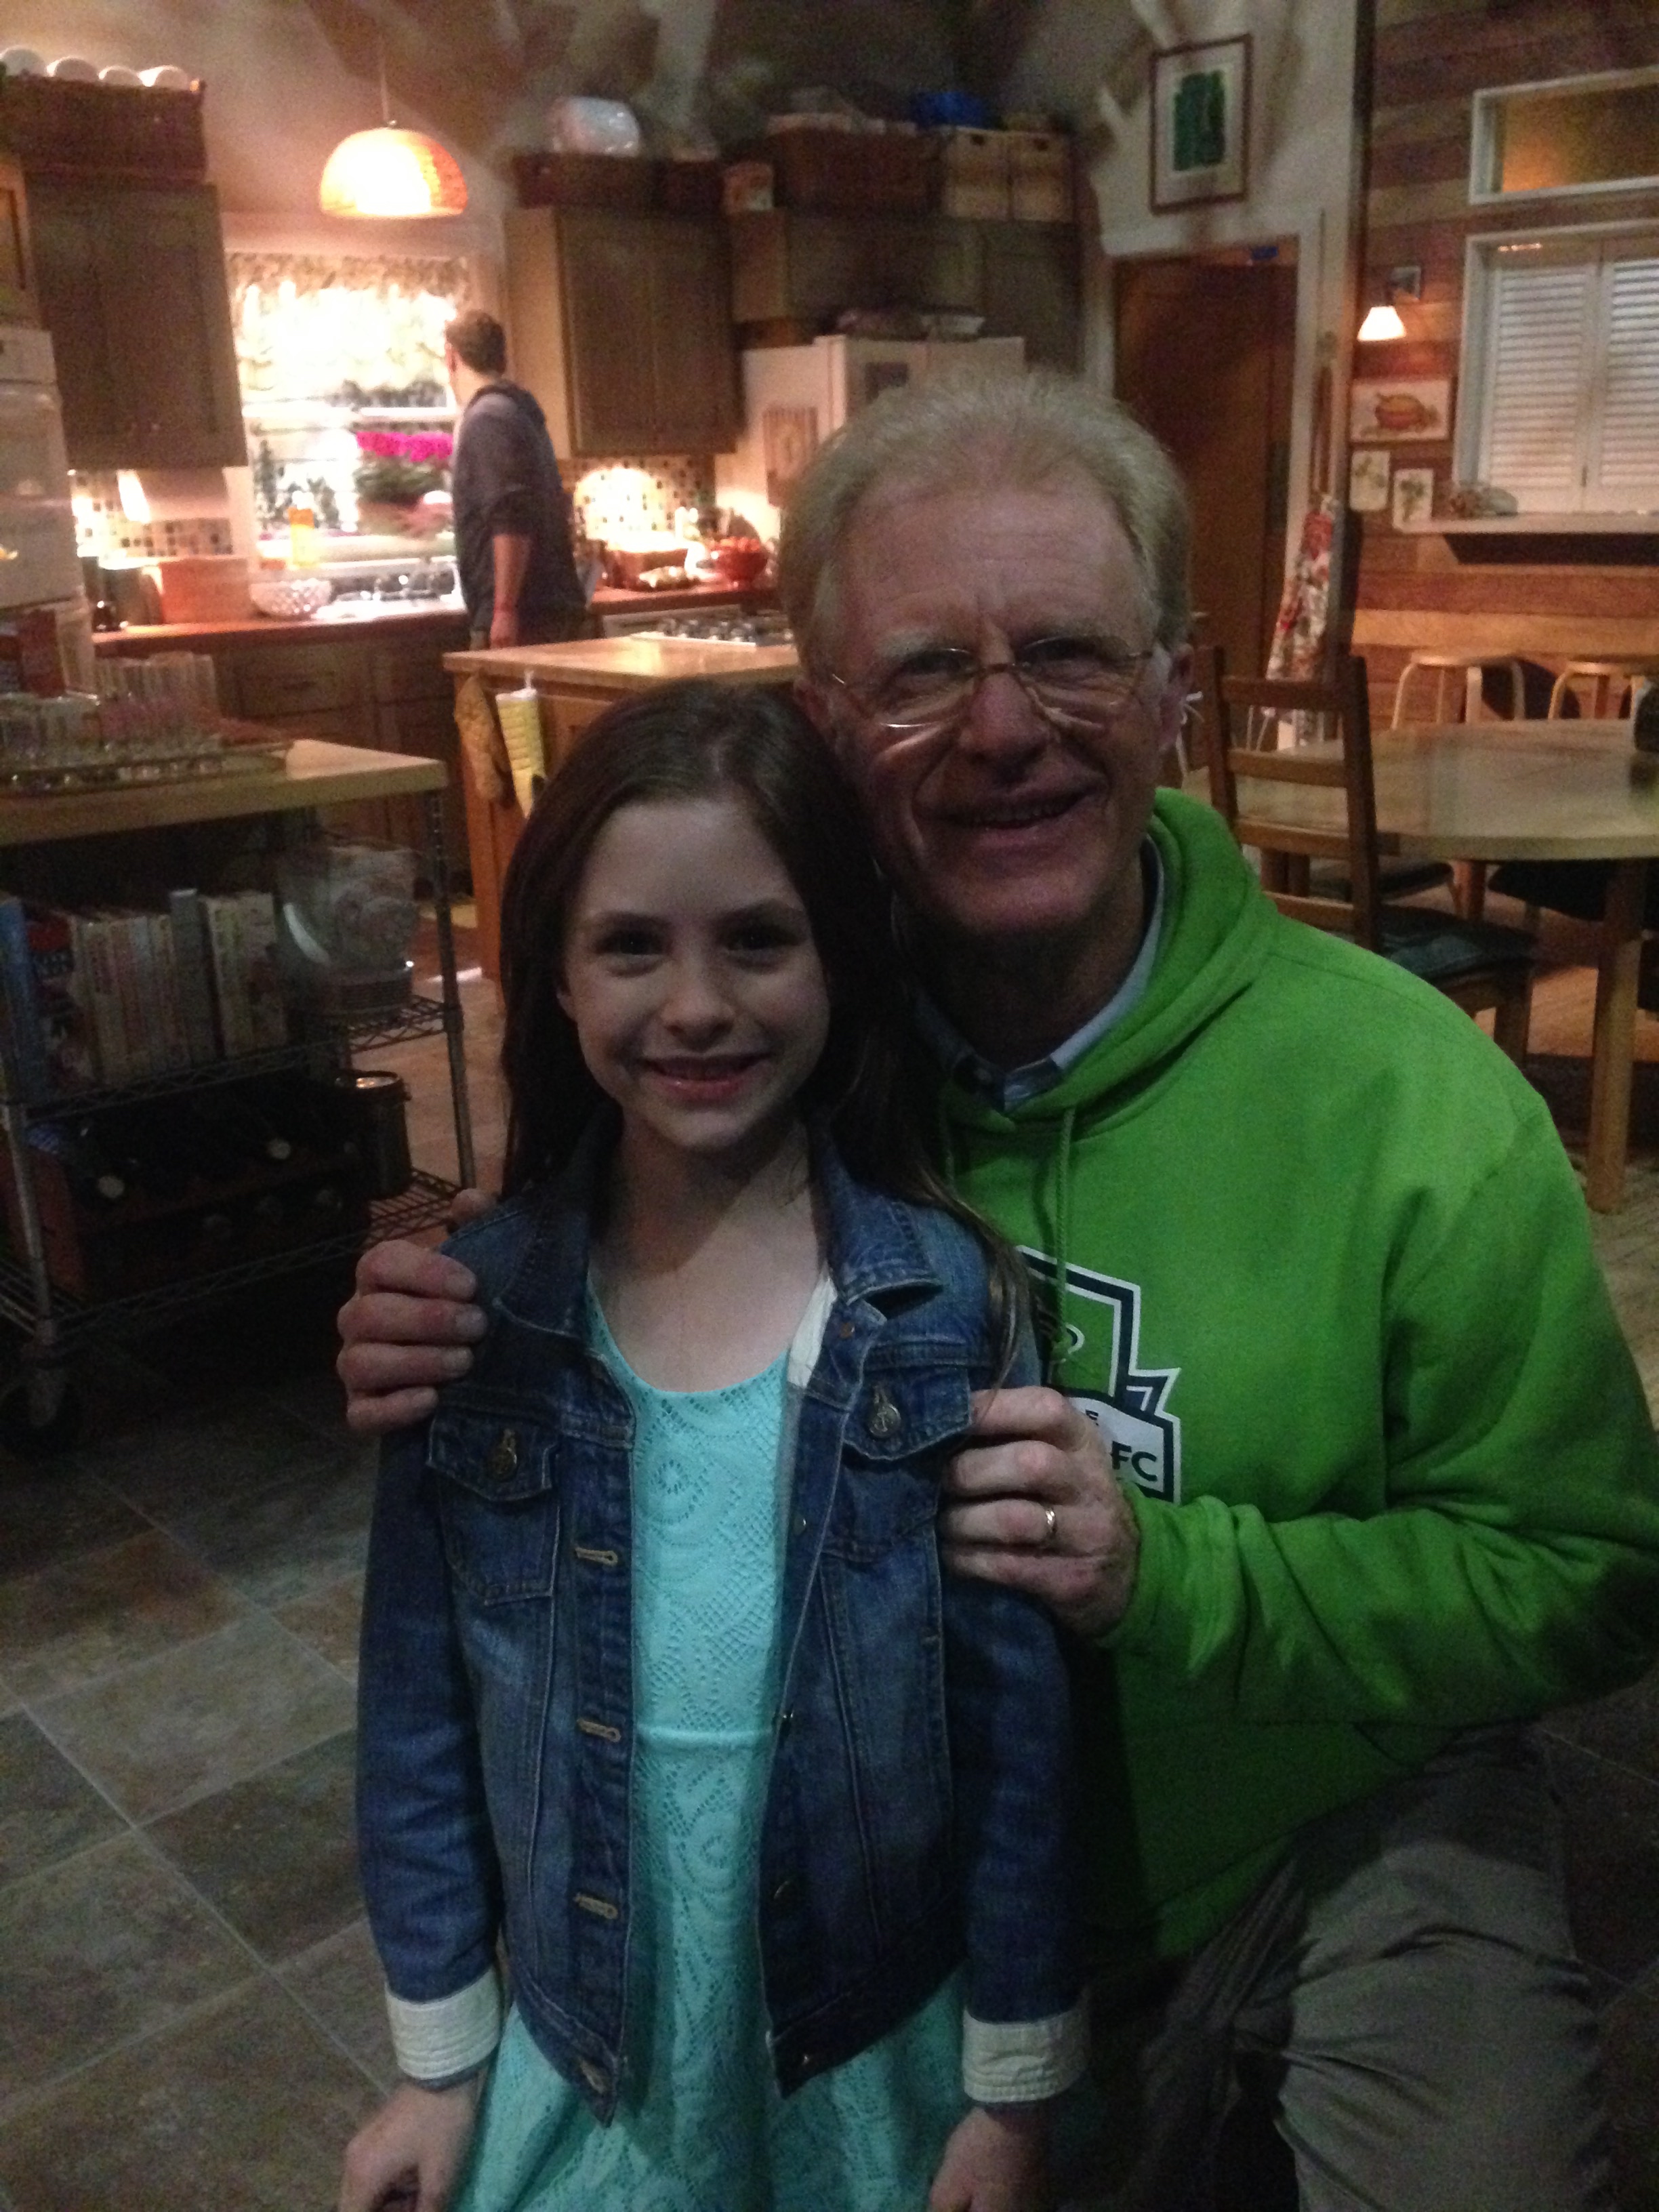 Afra with Ed Begley Jr. on the set of 